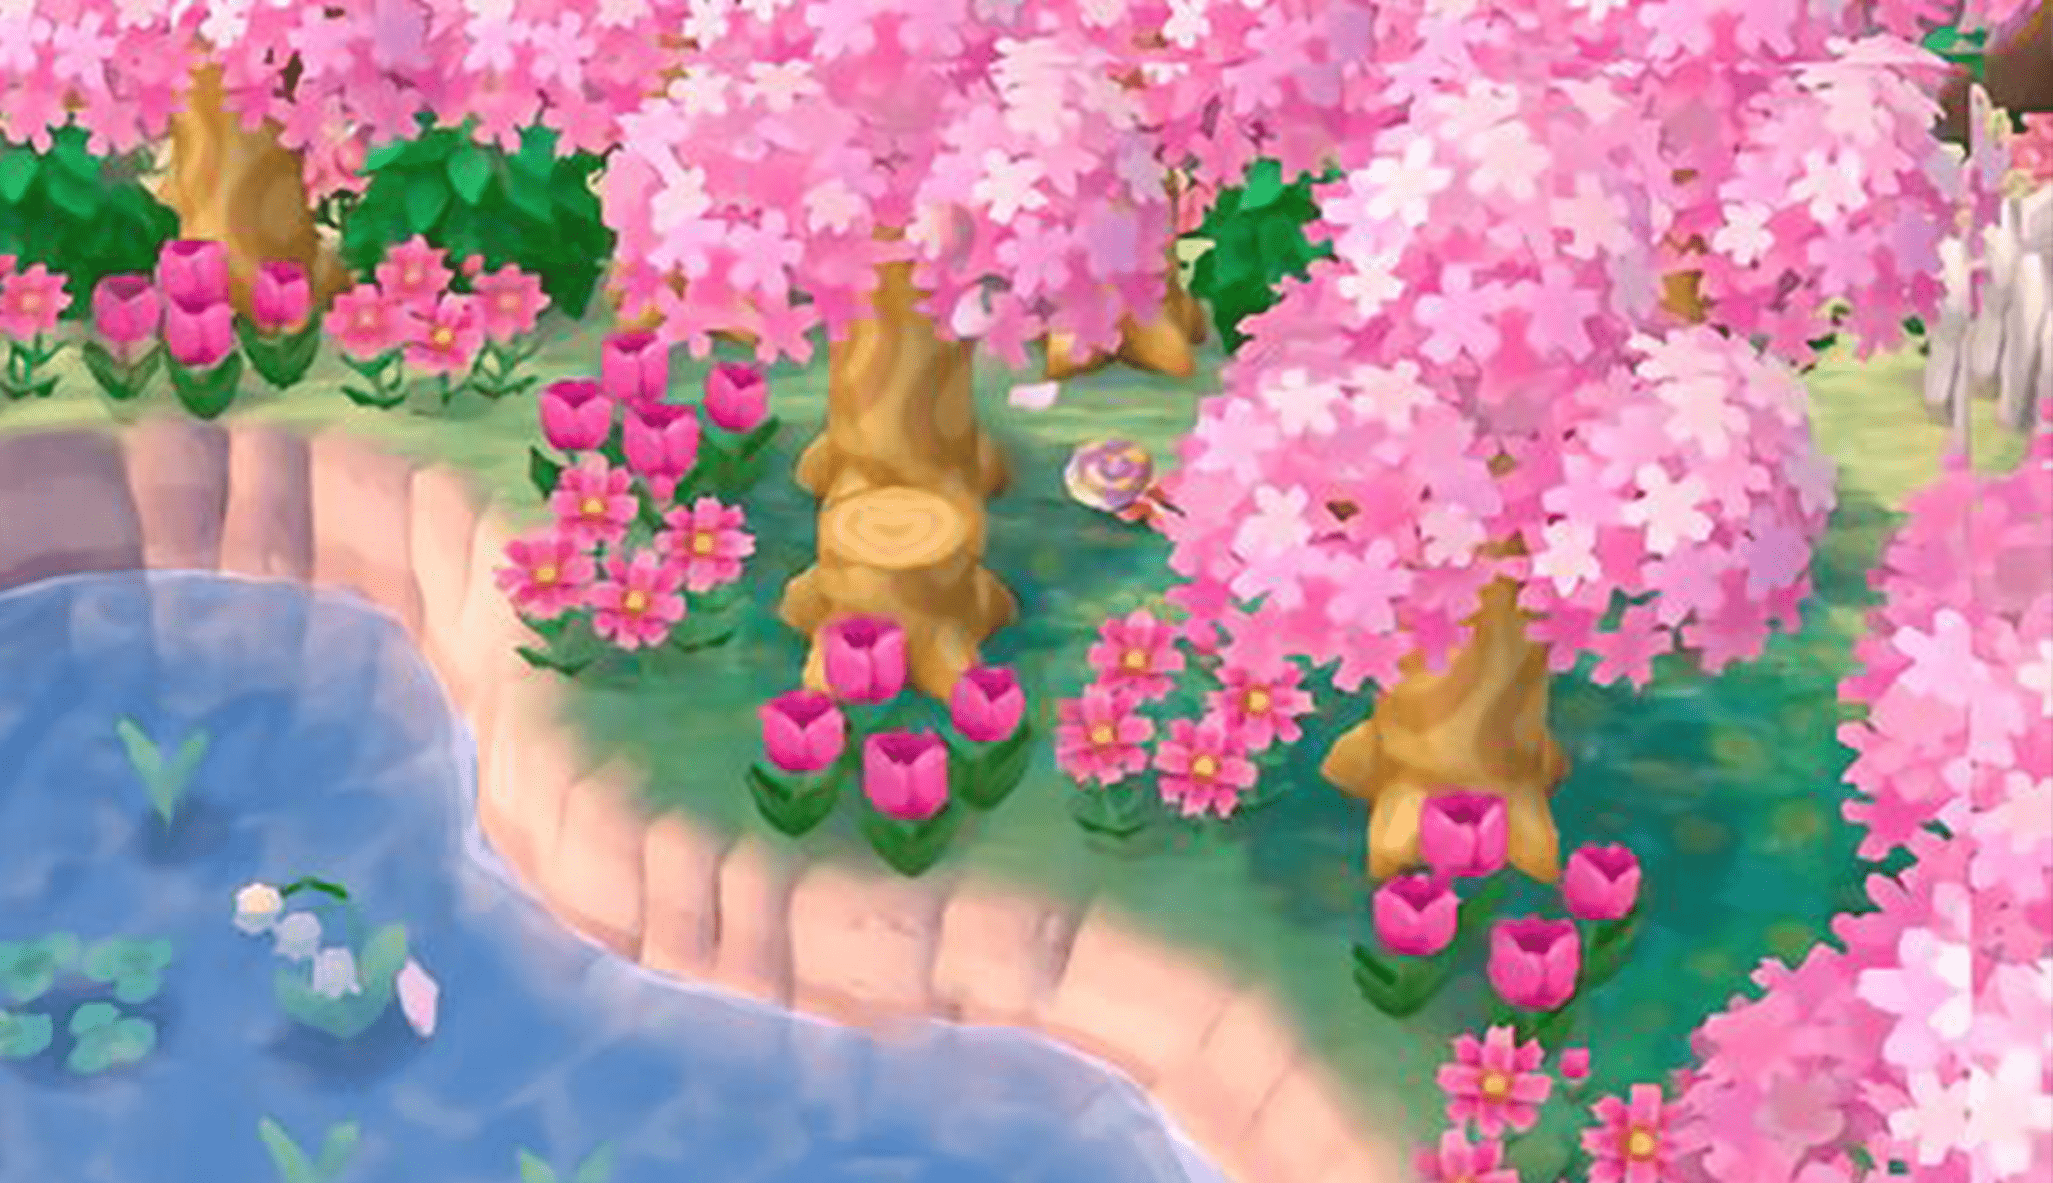 animal crossing 1080P 2k 4k HD wallpapers backgrounds free download   Rare Gallery